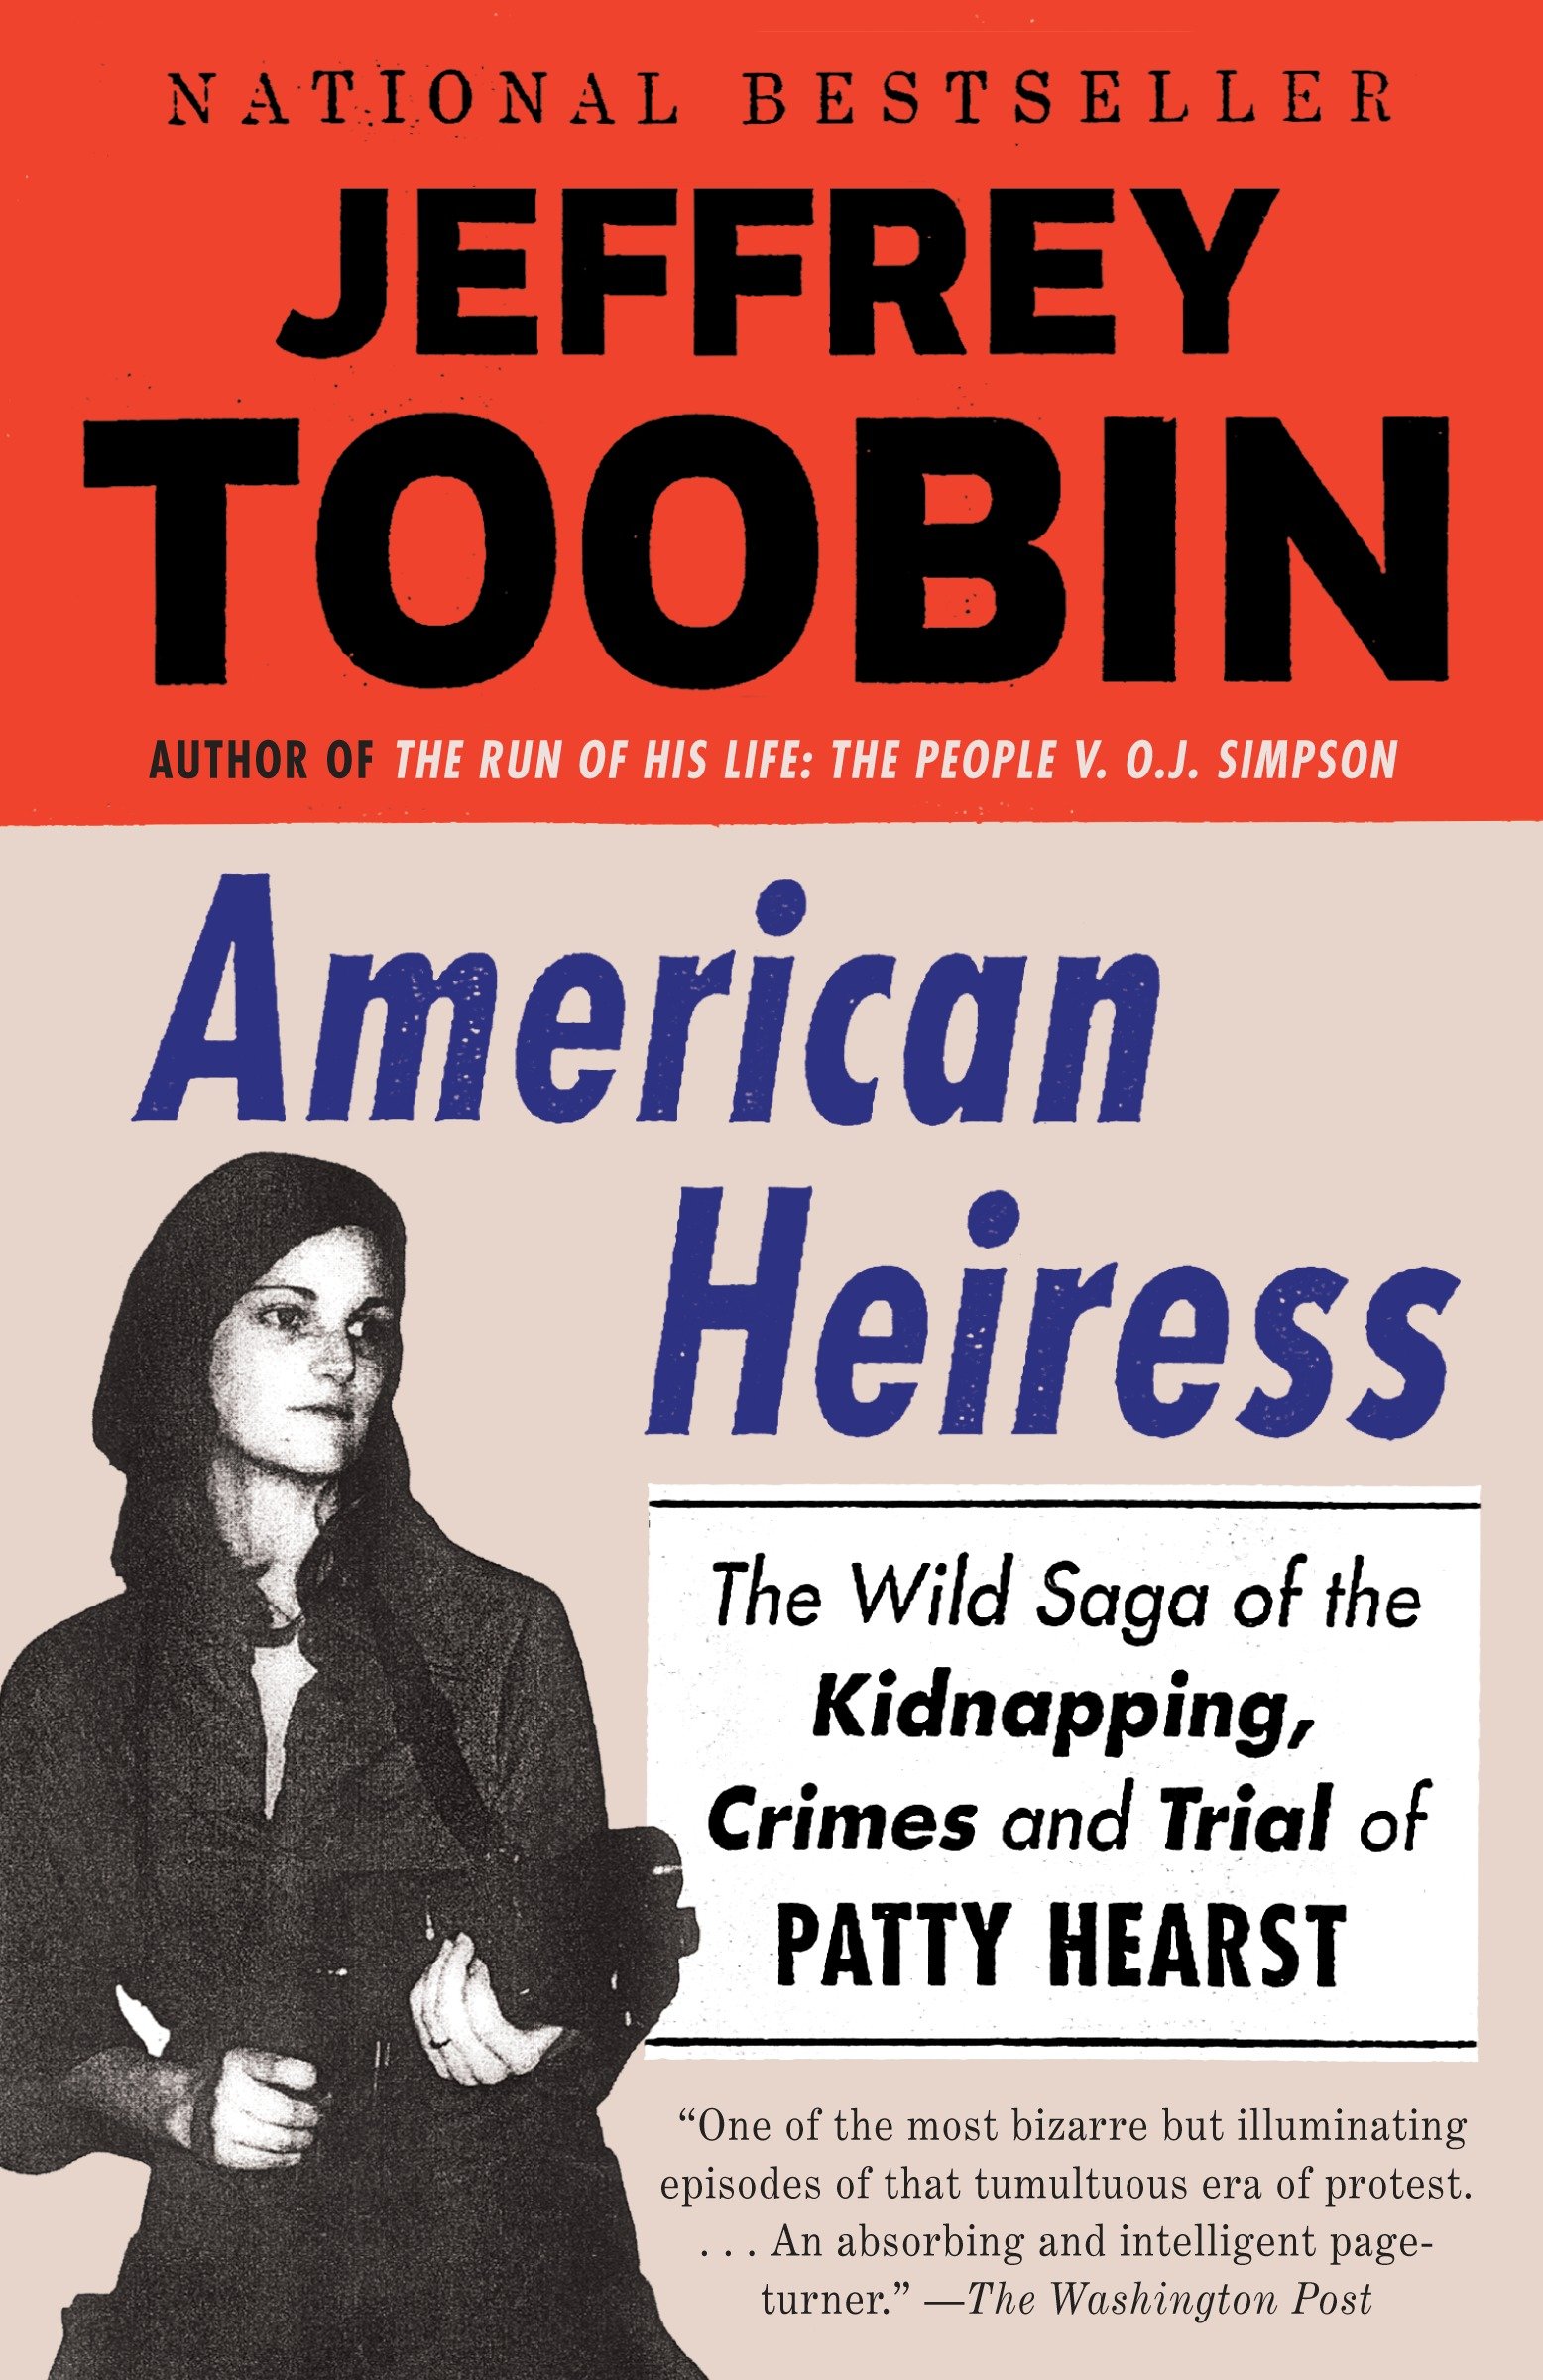 American heiress the wild saga of the kidnapping, crimes and trial of Patty Hearst cover image